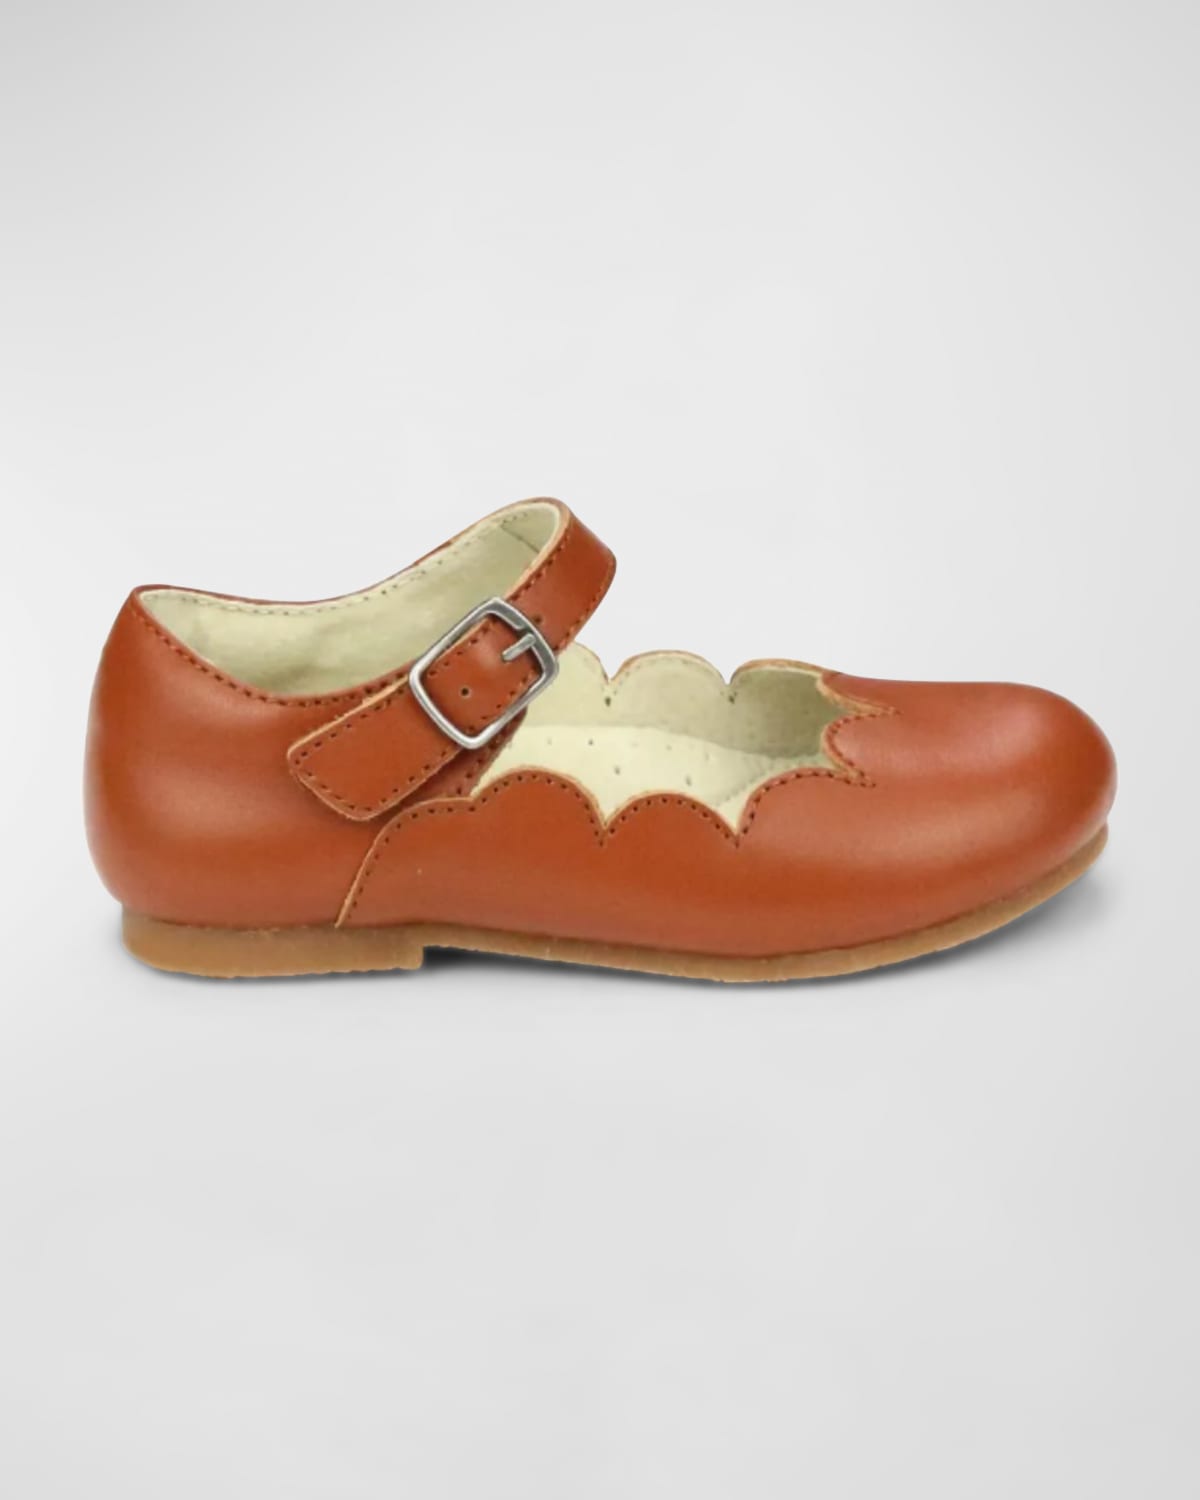 L'amour Shoes Kids' Girl's Sonia Scalloped Flats, Baby/toddlers In Cognac